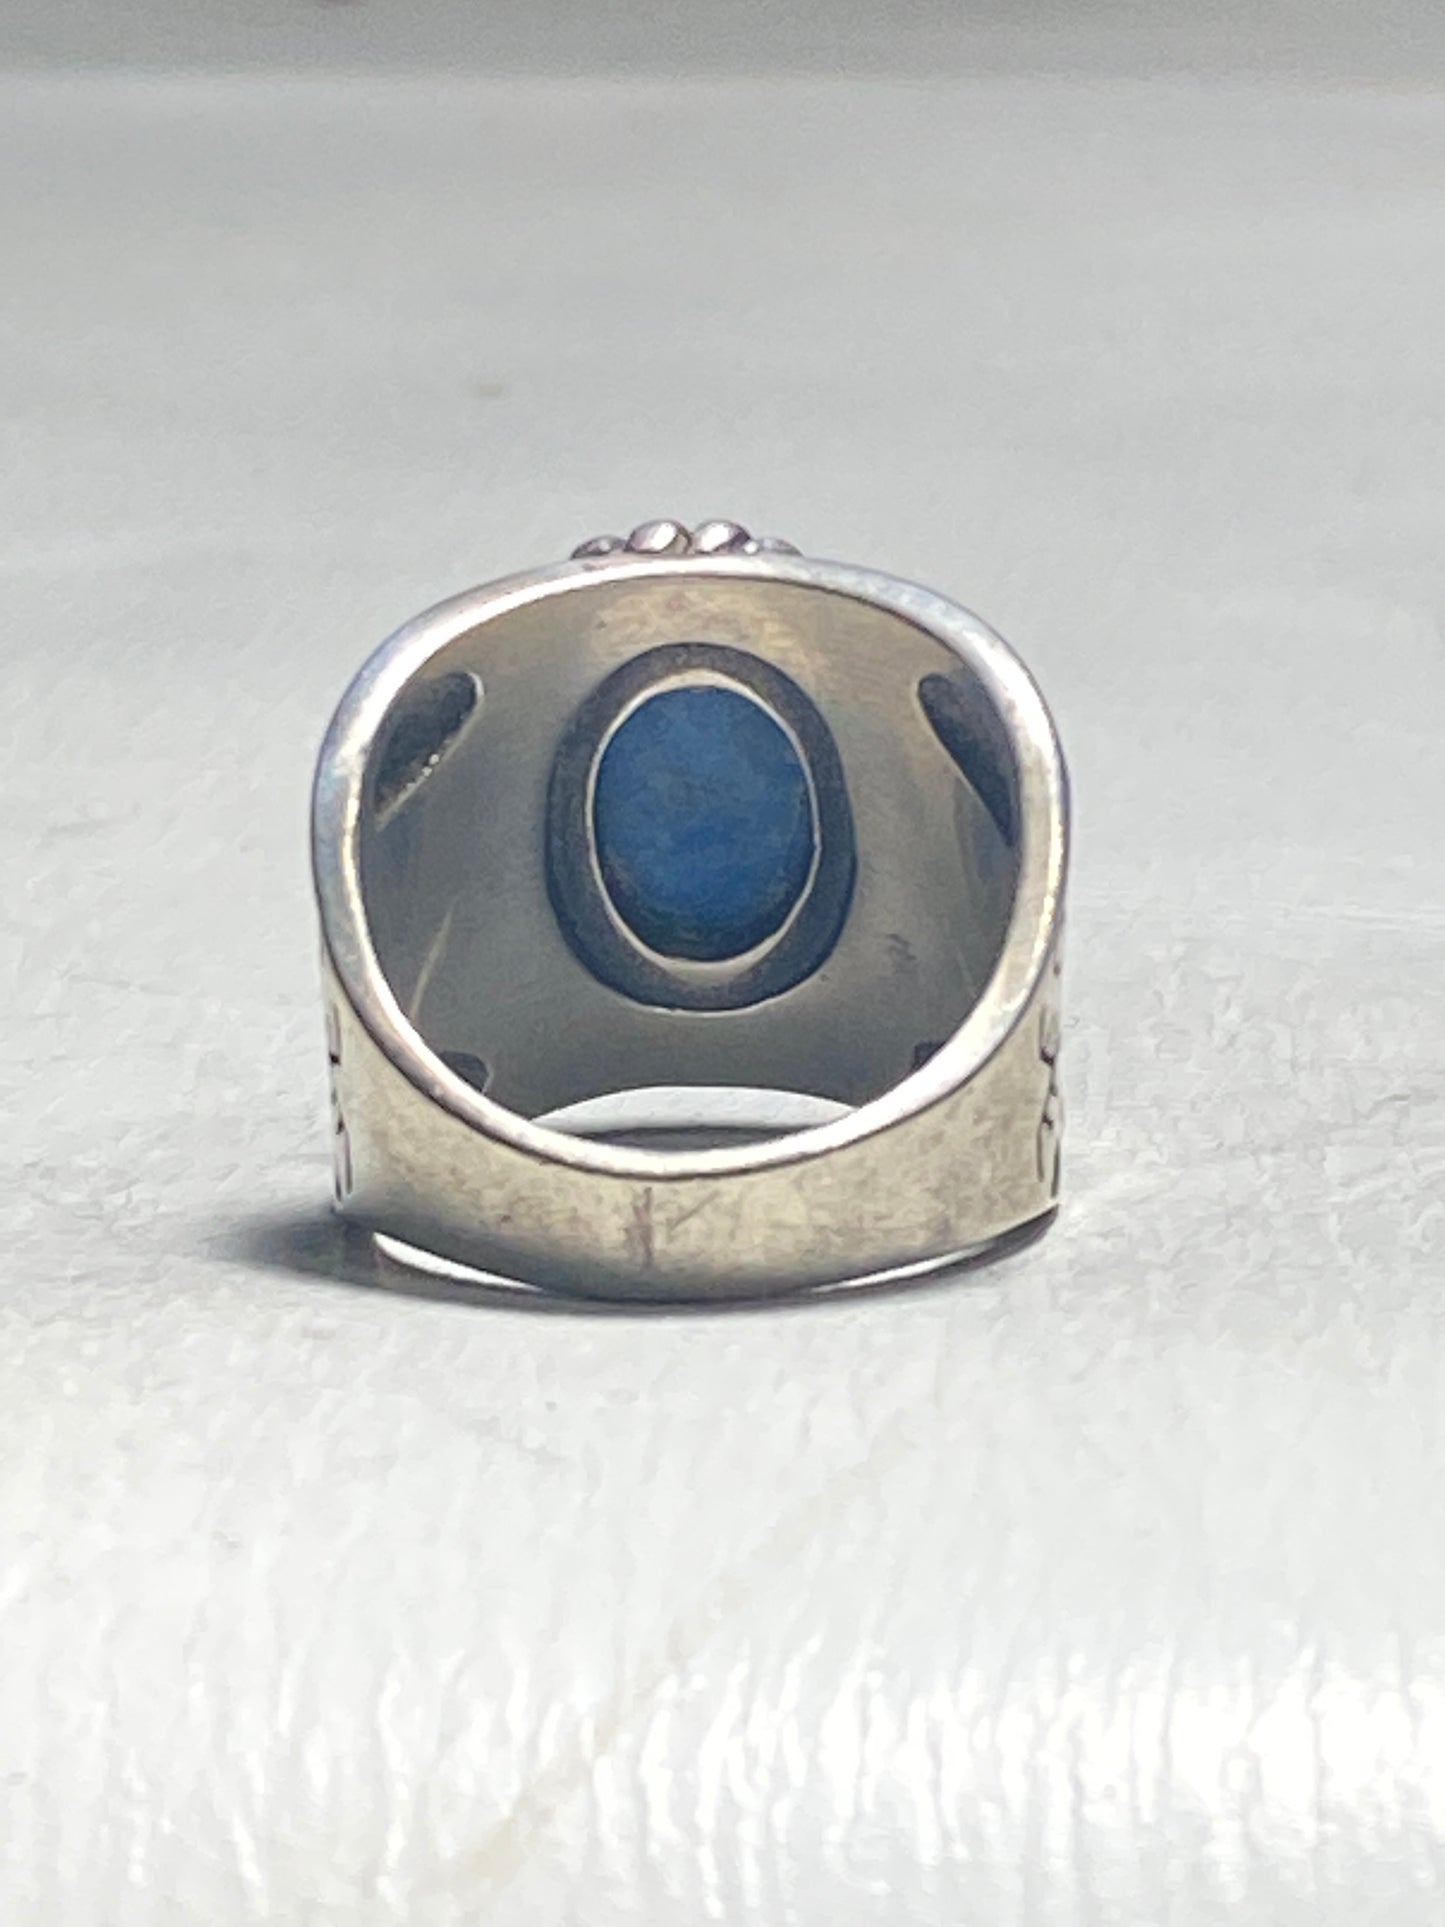 Pollack ring blue stone cigar band sterling silver women